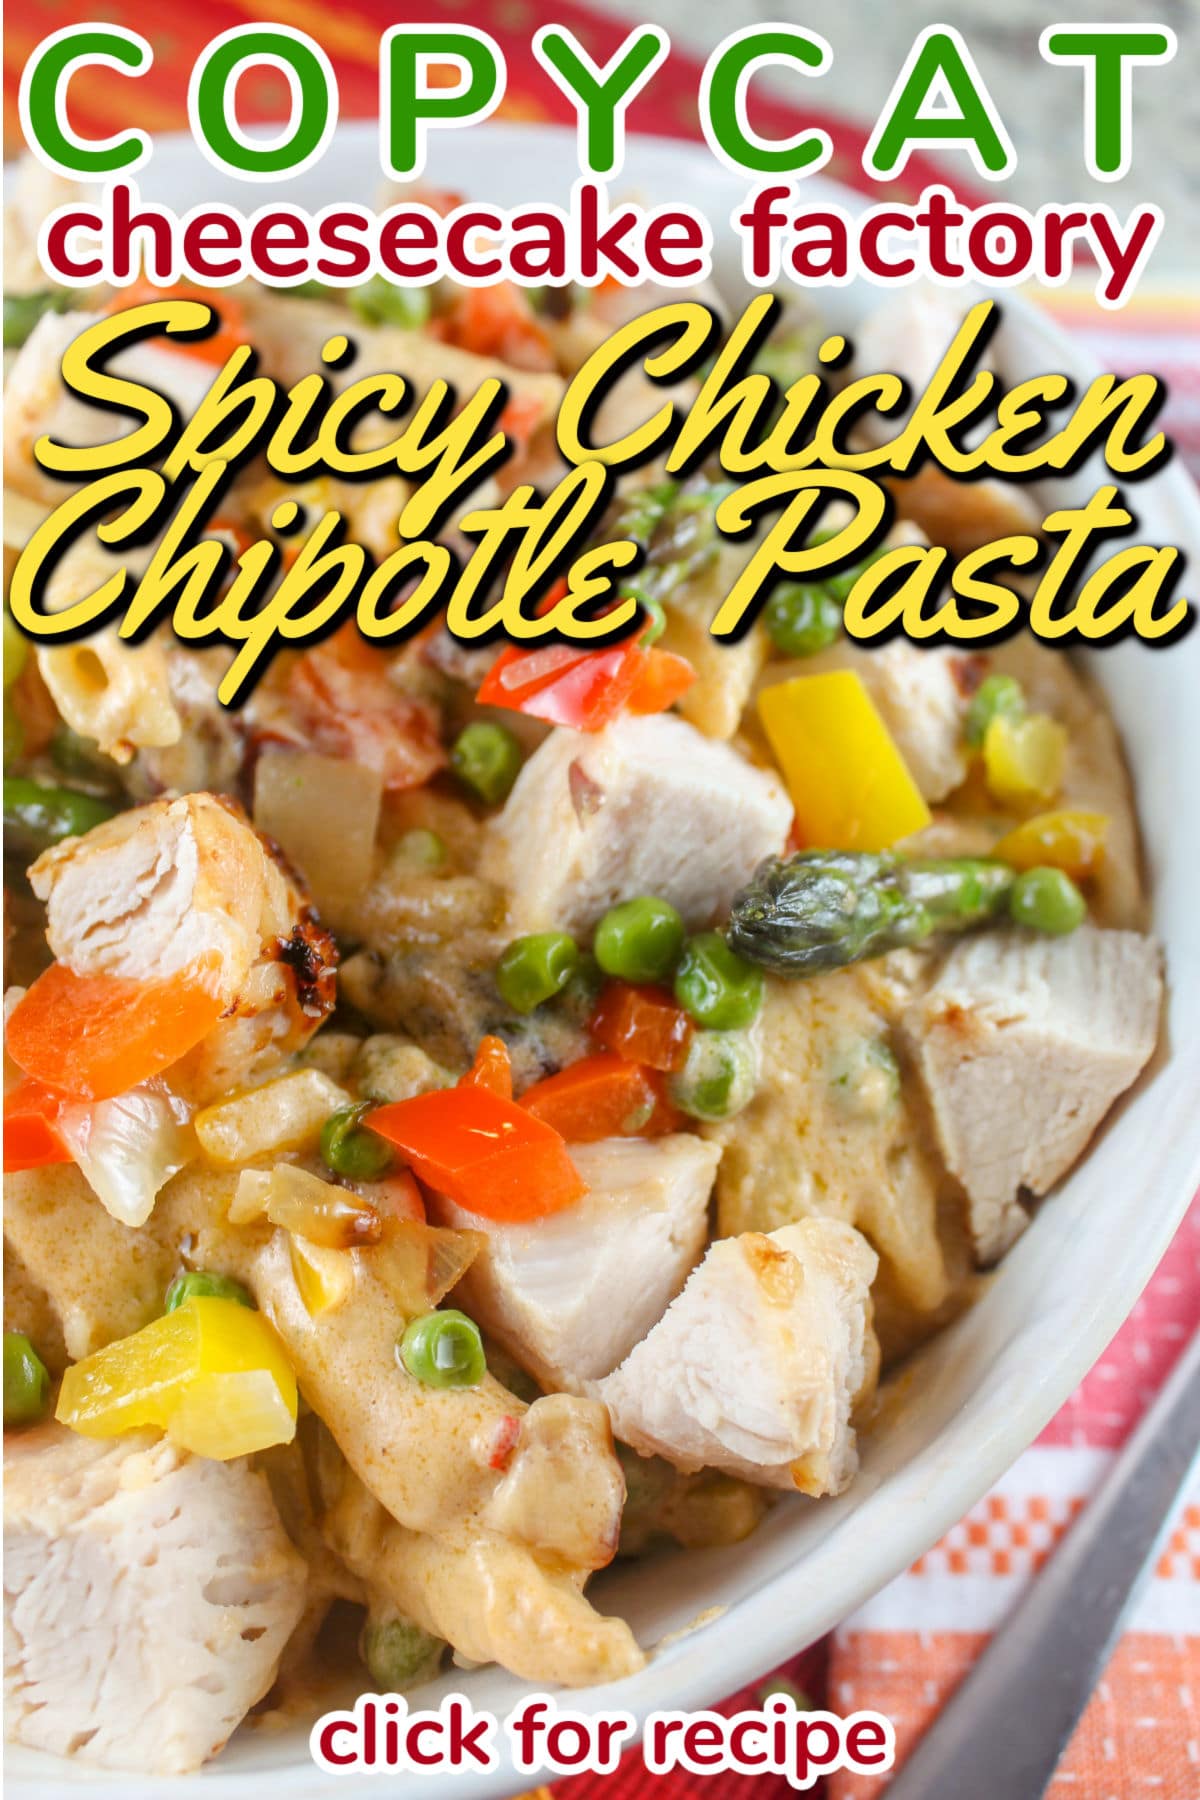 Cheesecake Factory's Spicy Chicken Chipotle Pasta is a favorite of mine - it's got tons of veggies but is also cream and yum! This copycat recipe of the chipotle chicken pasta will surely be a family favorite - and even make the kids like asparagus!  via @foodhussy